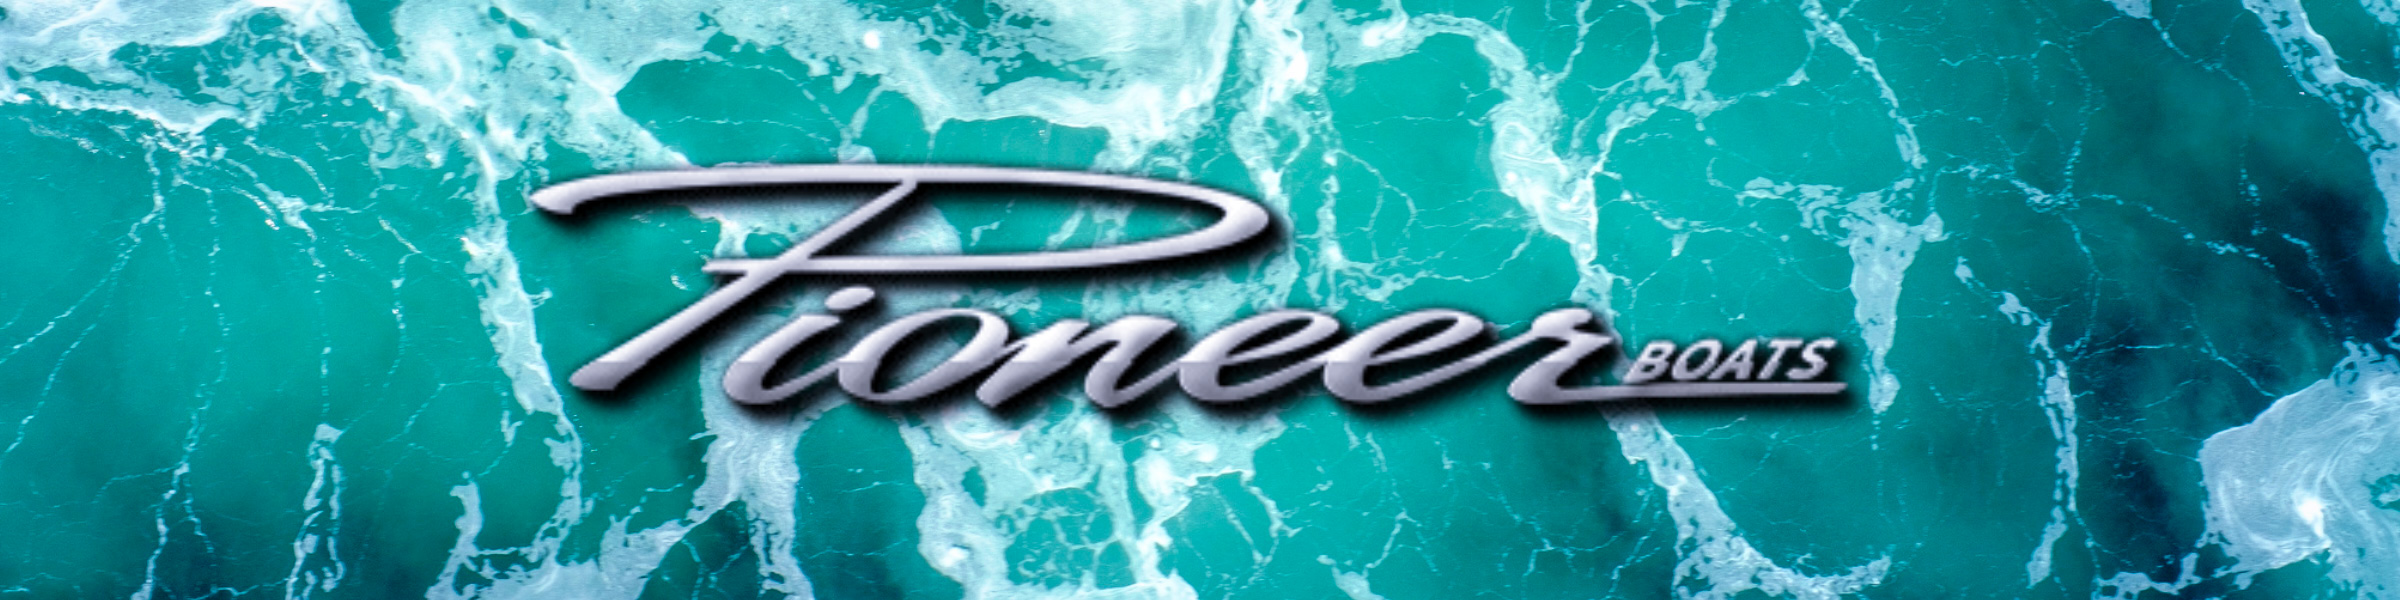 Pioneer Boats Page Banner